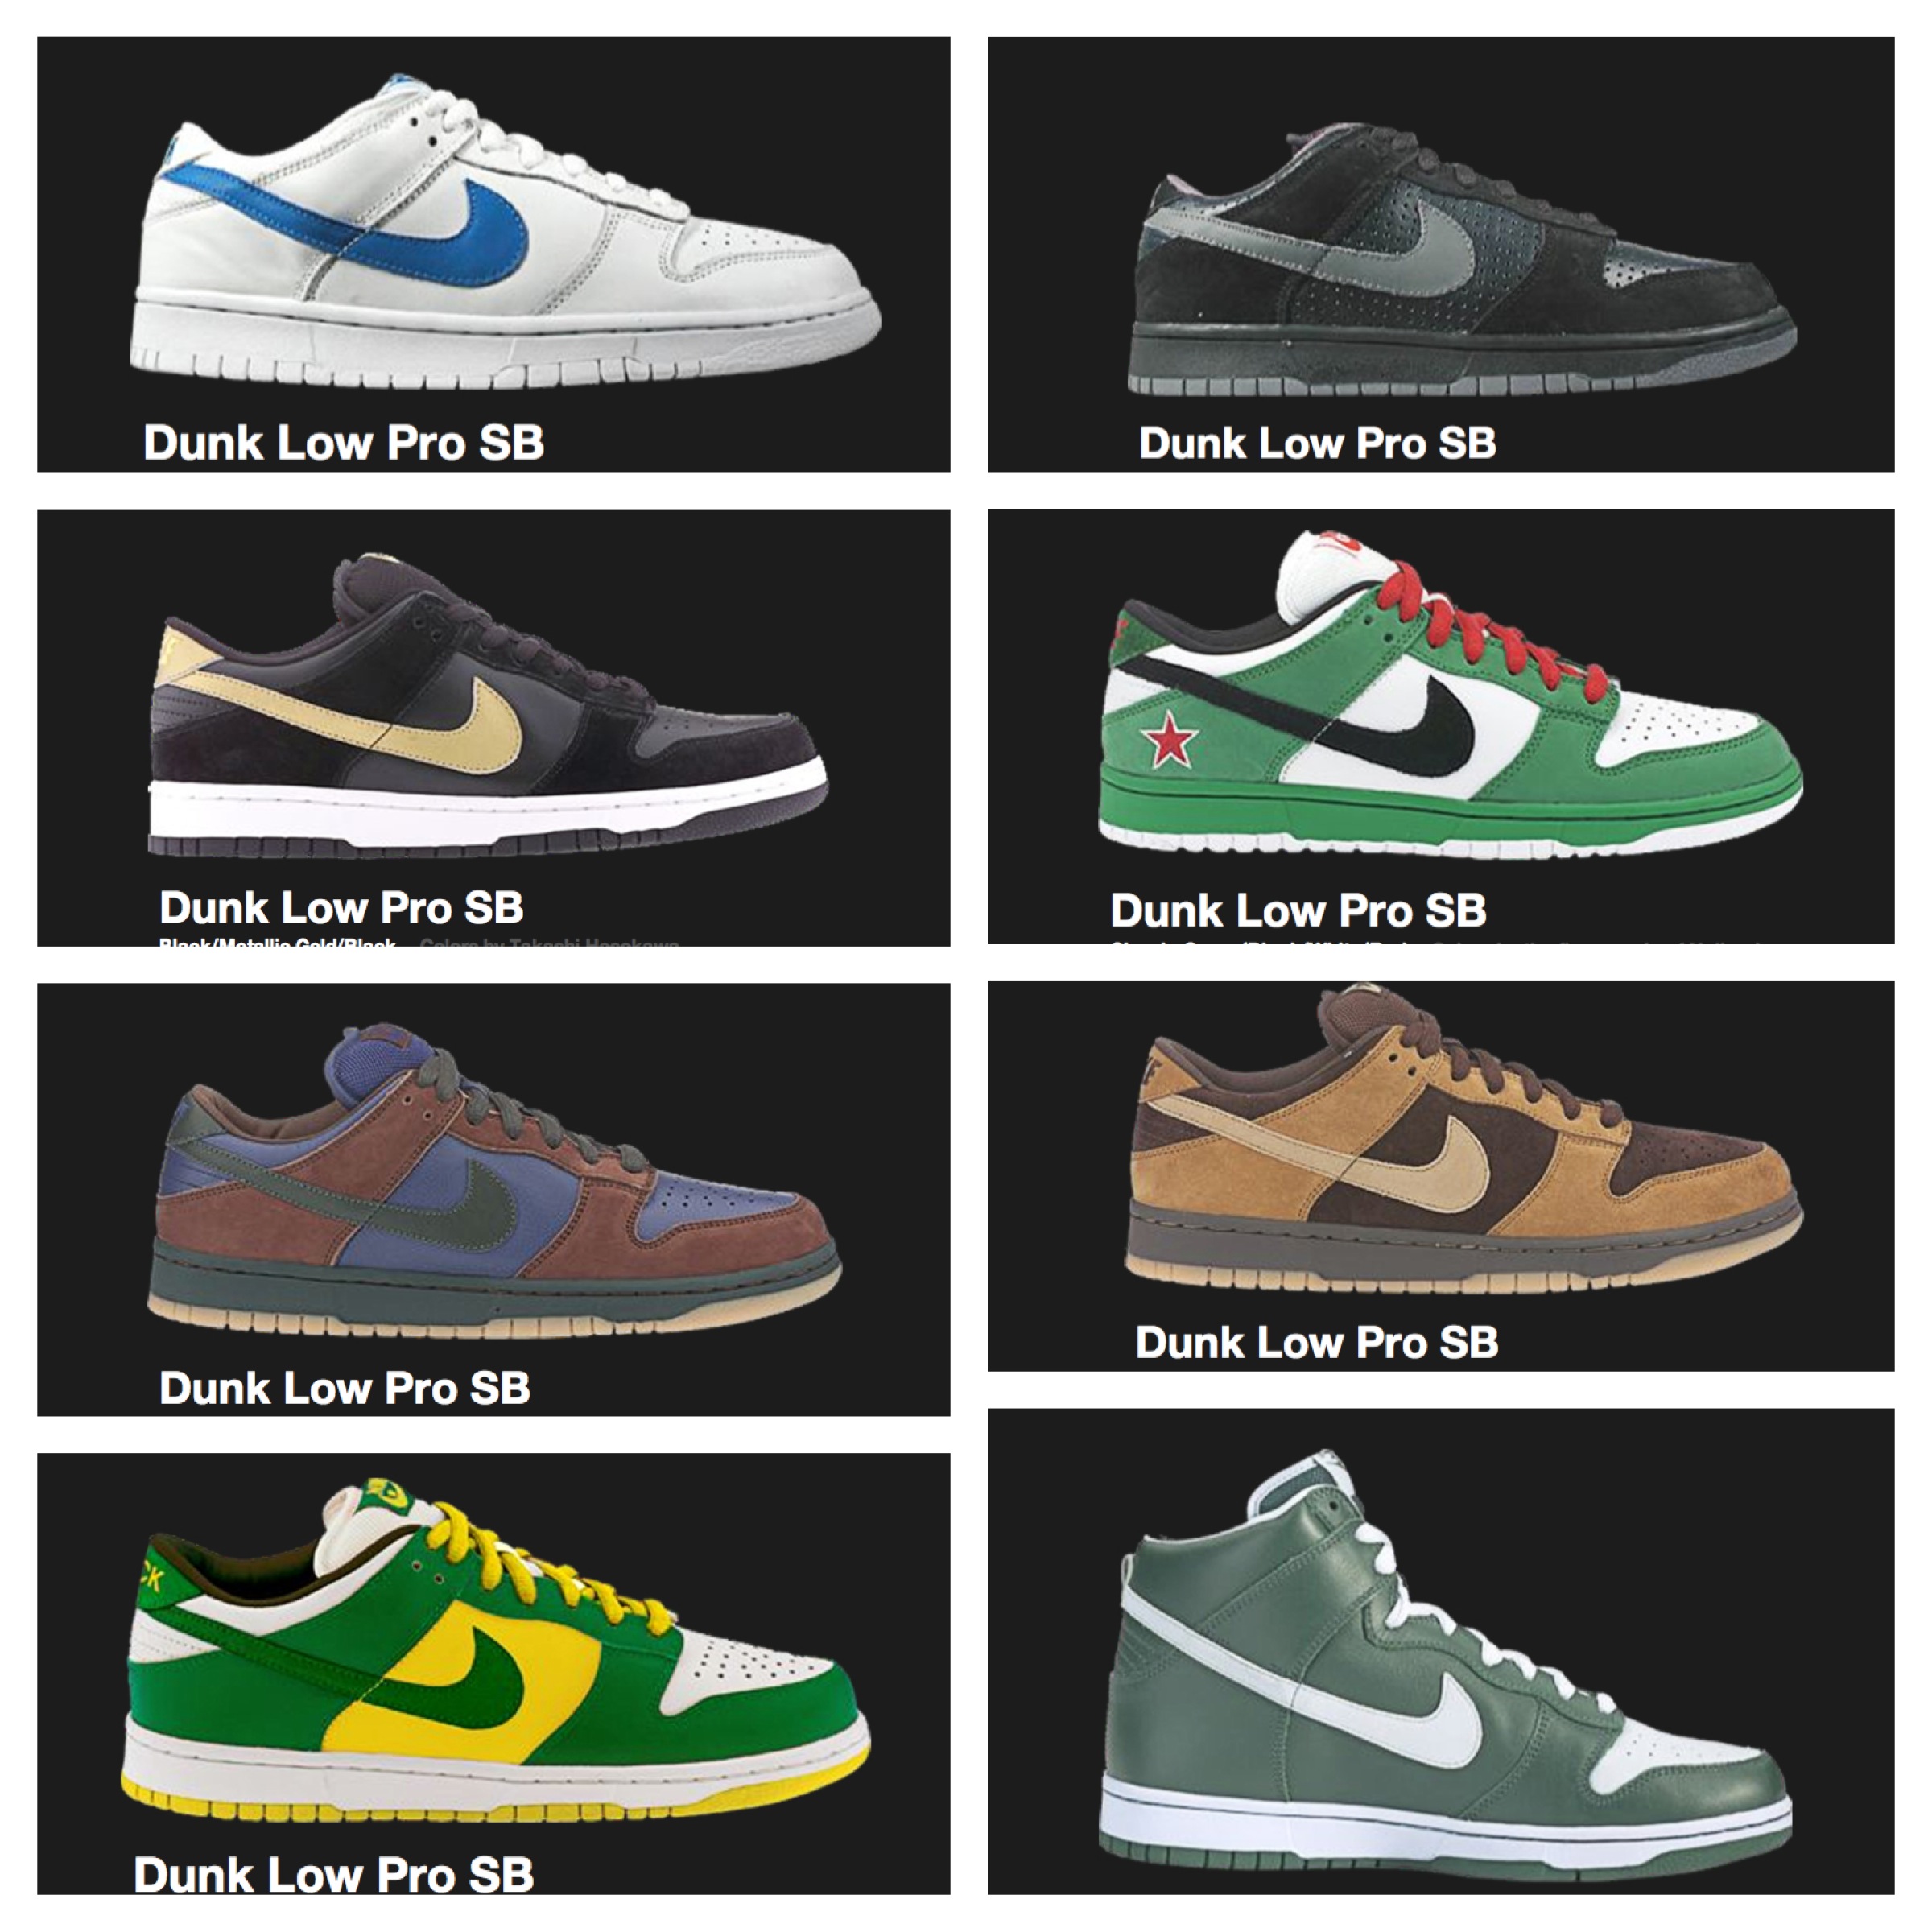 nike dunks collection